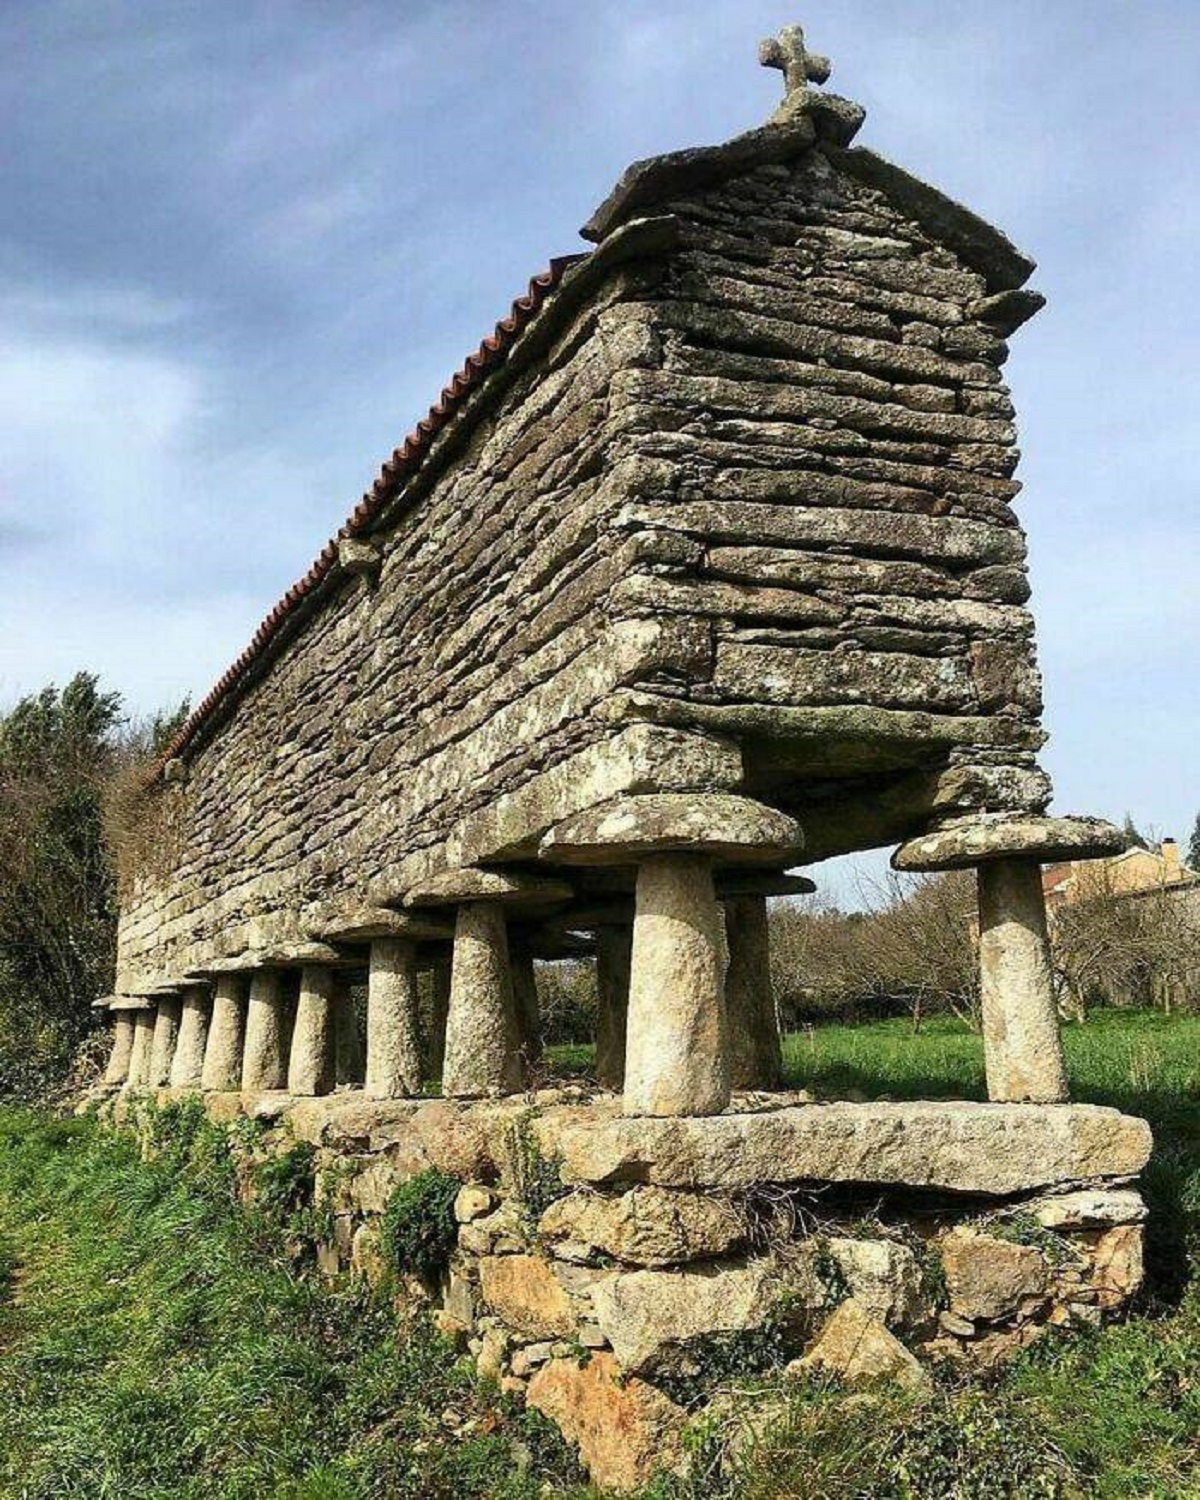 "A Horreo Is A Traditional Granary Or Storage Building Commonly Found In The Northwest Region Of Spain, Particularly In Galicia, Asturias, And Cantabria"